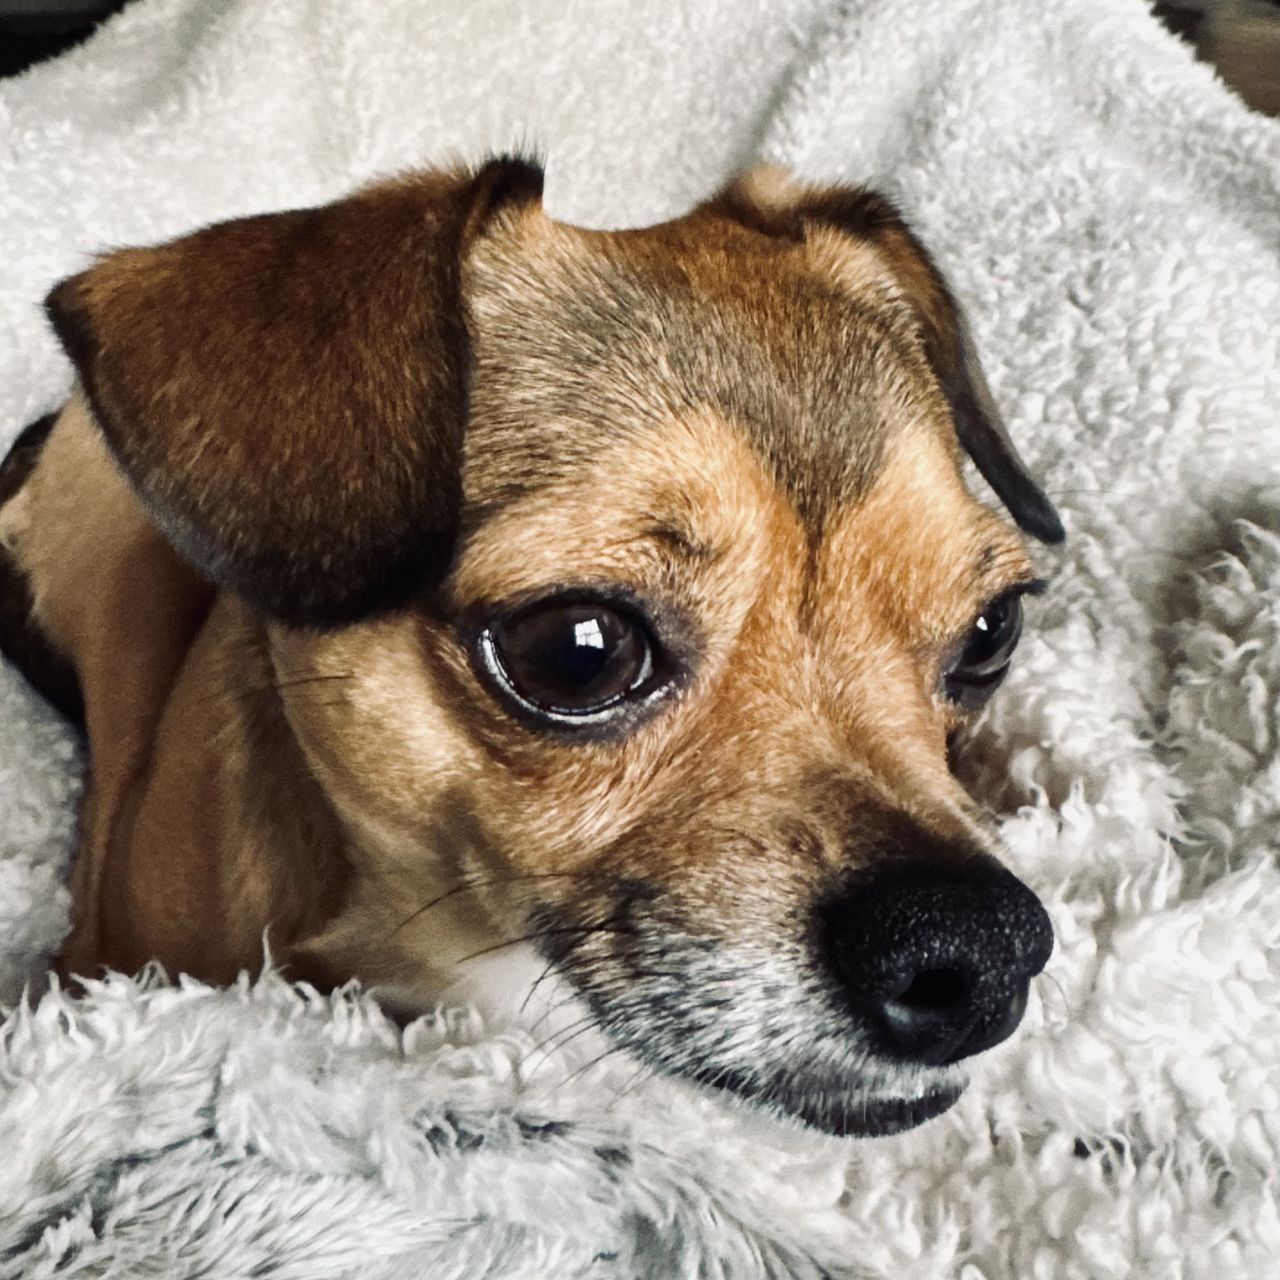 one animal, canine, dog, mammal, domestic animals, pet, animal, animal themes, lap dog, relaxation, indoors, puppy, close-up, no people, portrait, bed, chihuahua, animal body part, furniture, cute, lying down, animal head, young animal